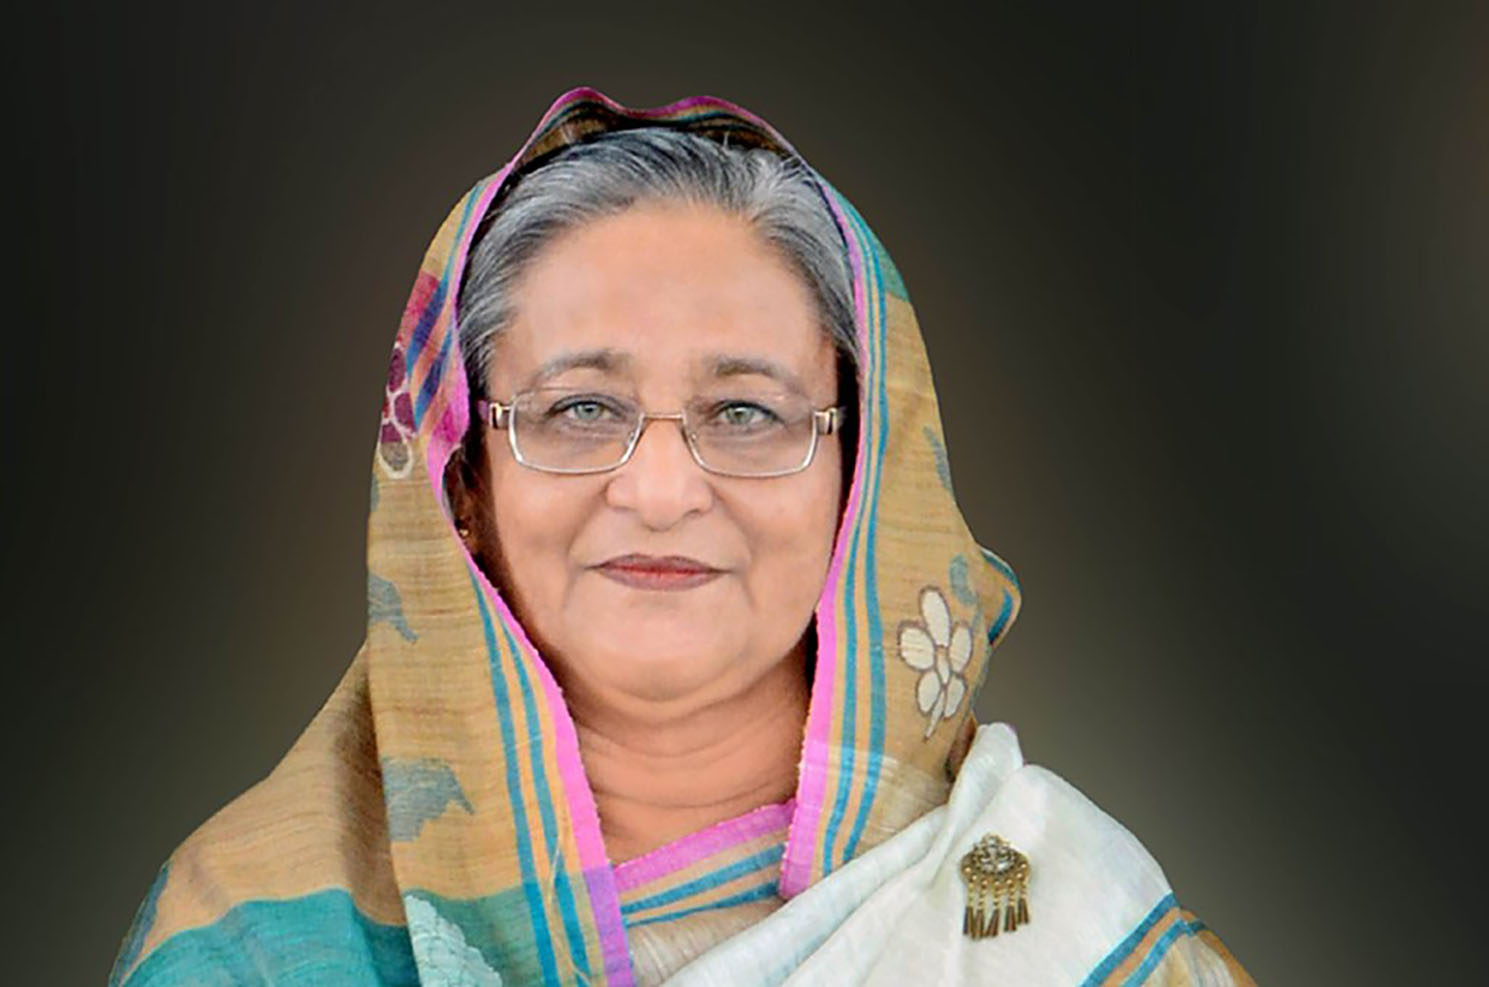 Atmosphere is fine enough for election in Bangladesh, says PM Sheikh Hasina